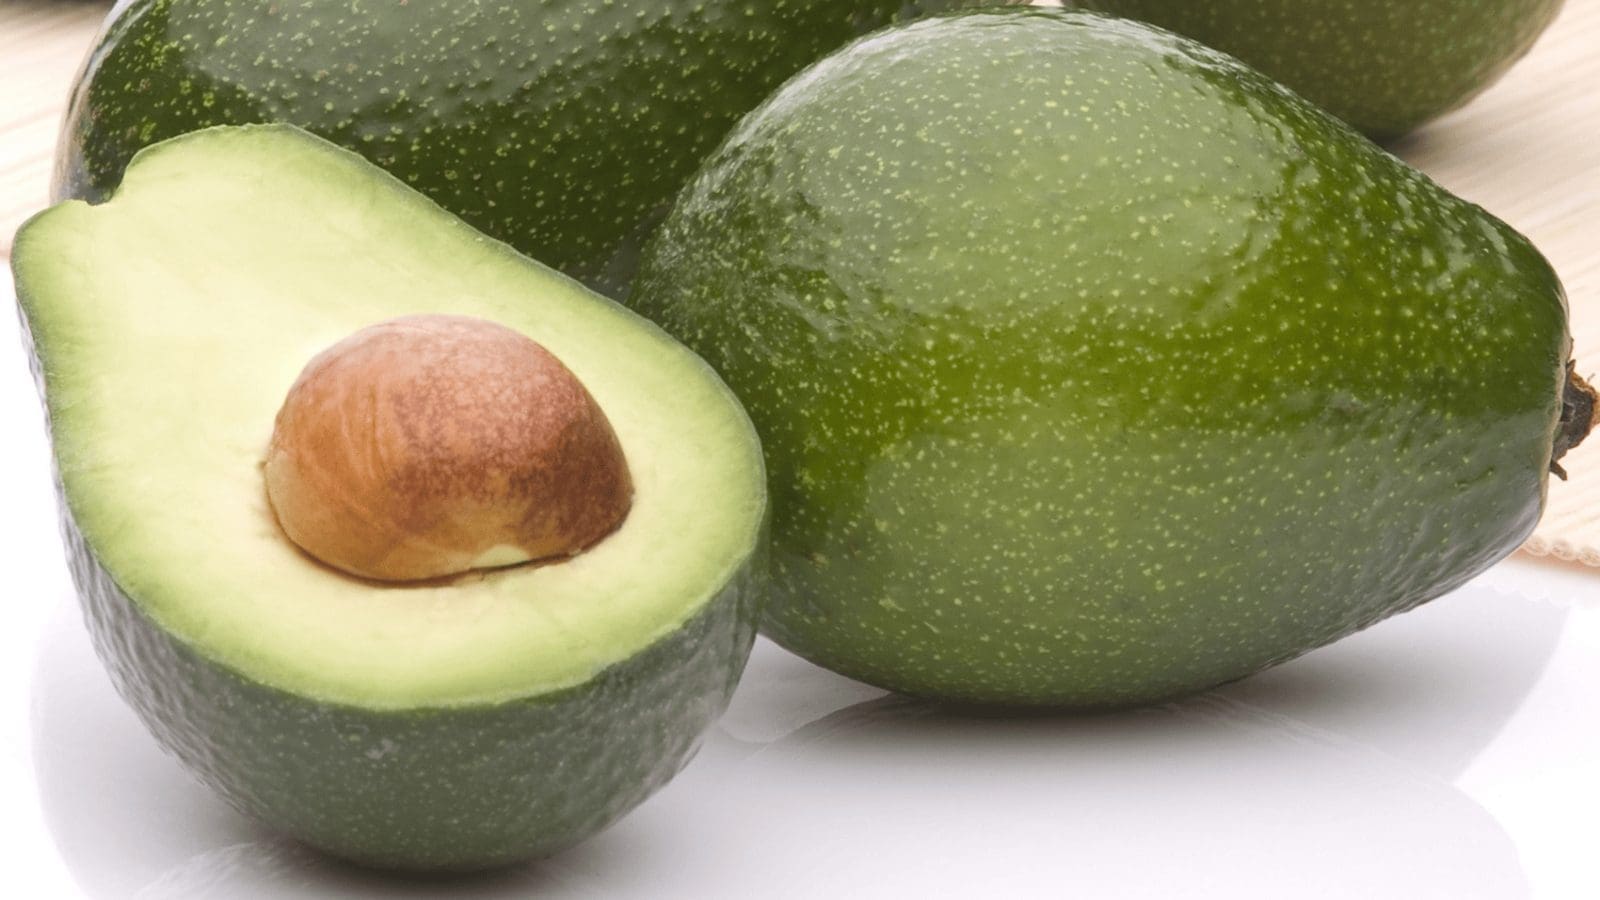 Kenya launches GAP guidelines for avocados, beans, peas in pods